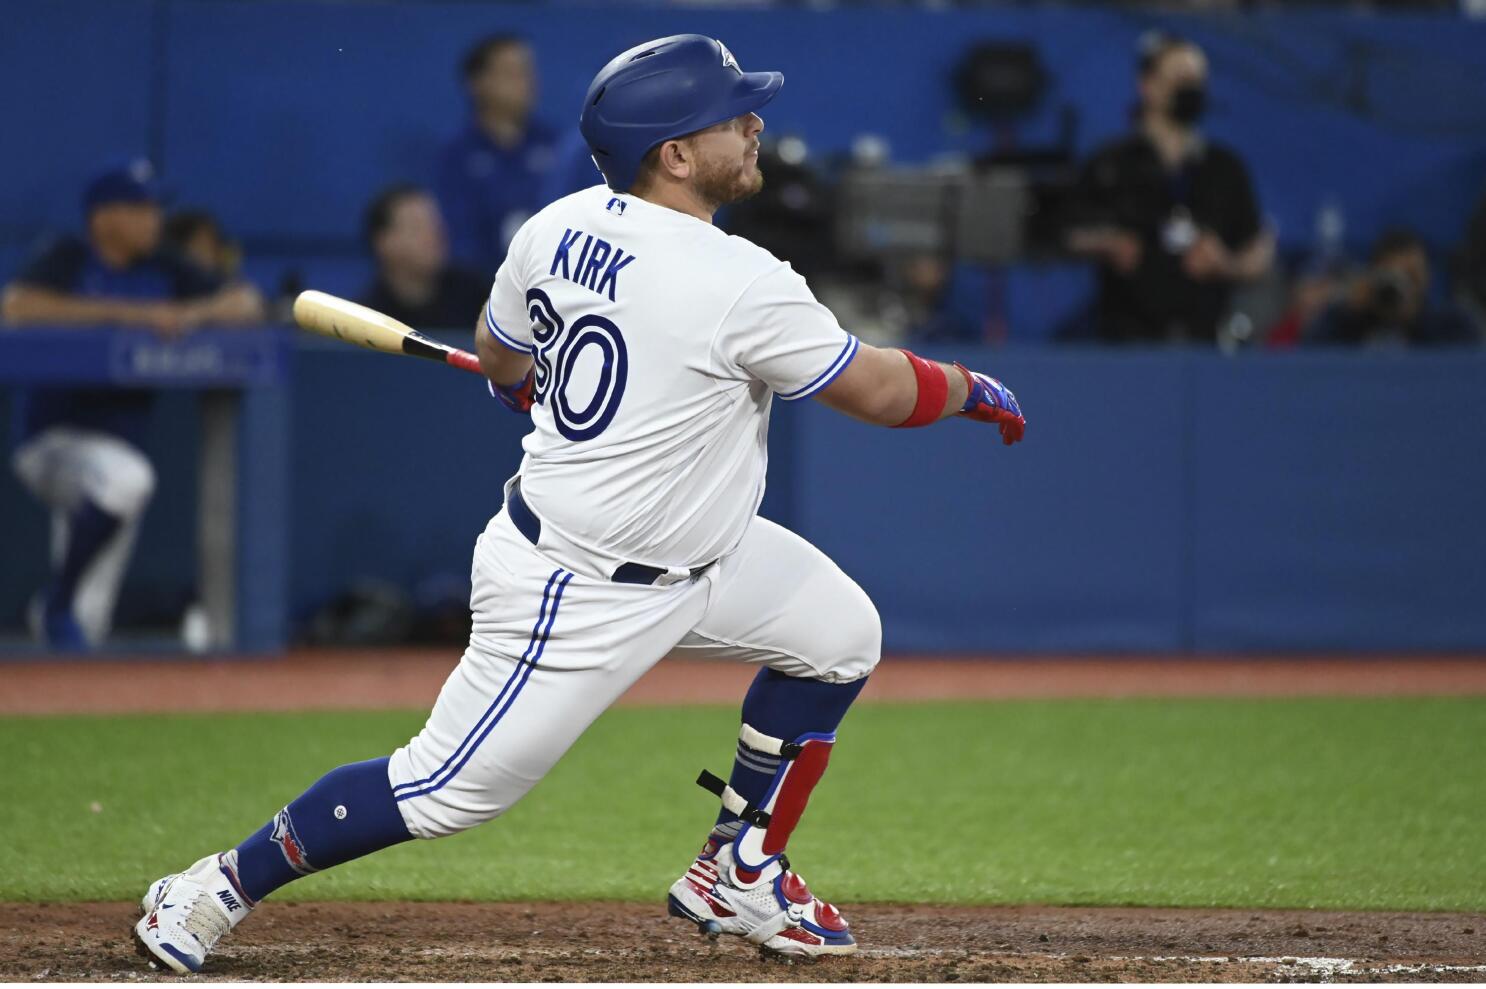 Kirk HRs twice, Jays beat White Sox 6-5 for 6th straight win